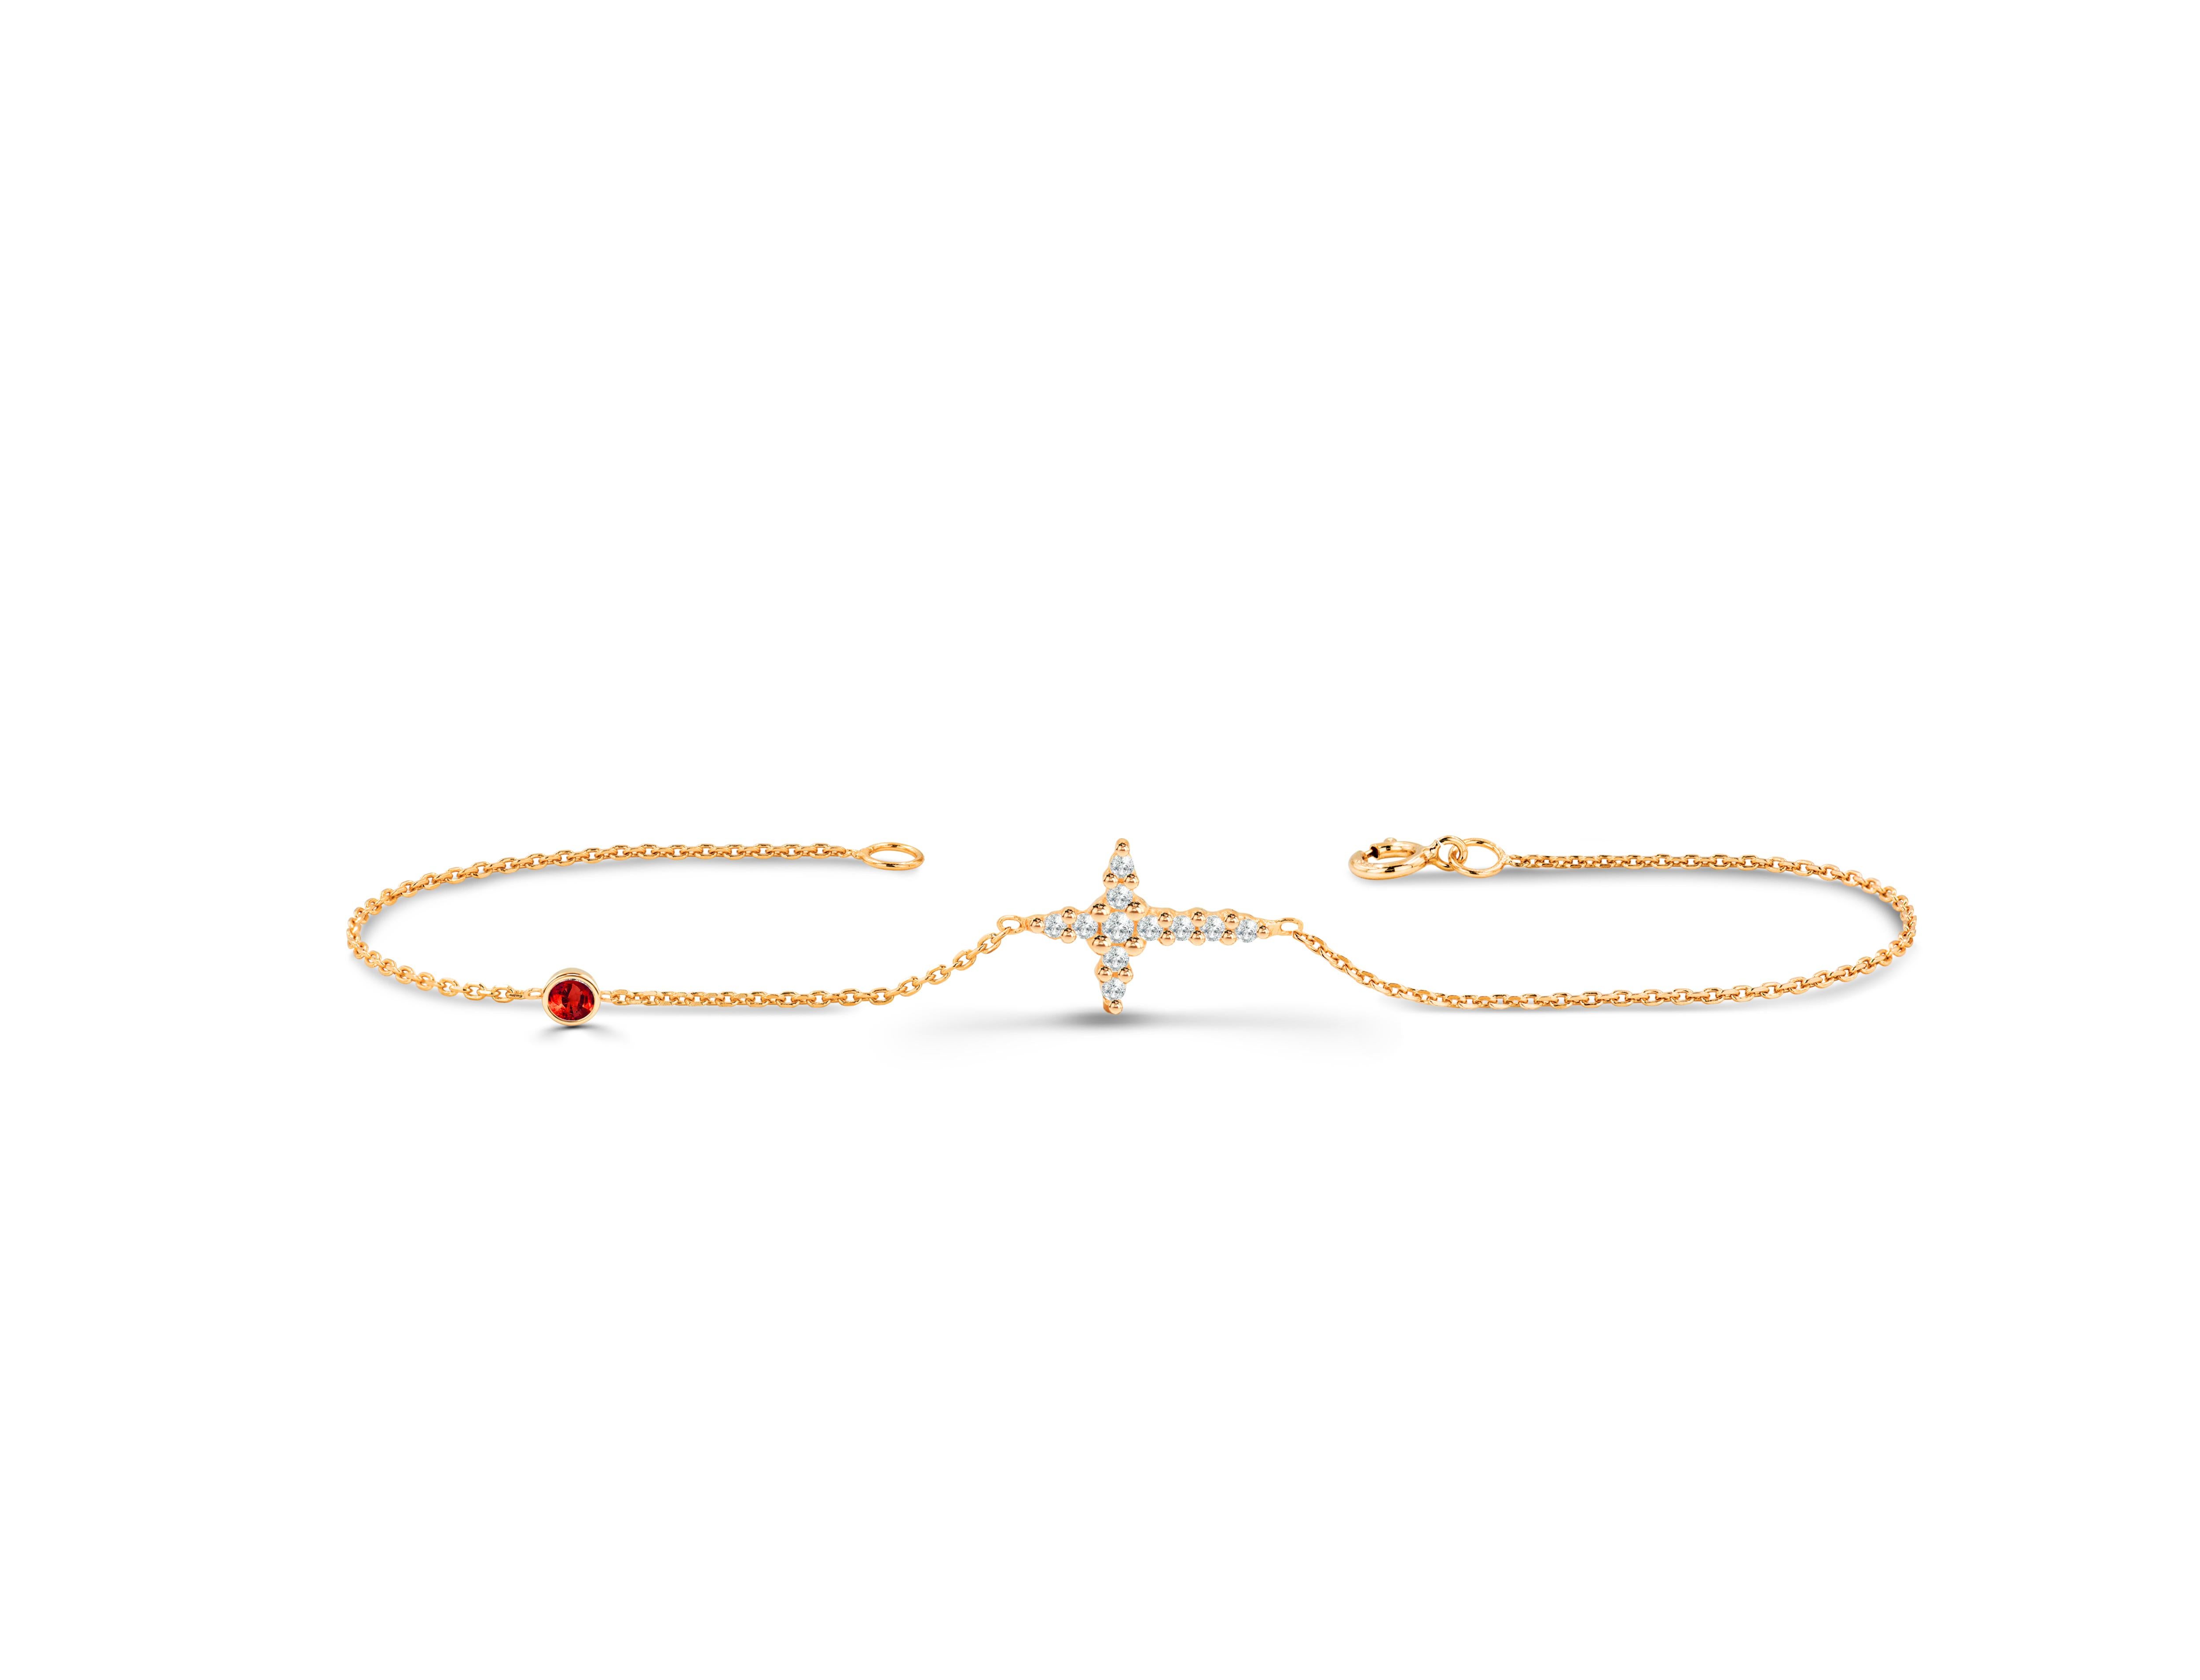 0.13 Carat diamond sideway Cross bracelet is a perfect religious bracelet and is meant for you to feel good and protected whenever worn. This bracelet comes with a customizable precious stone of your choice attached to the side - Emerald, Ruby, or